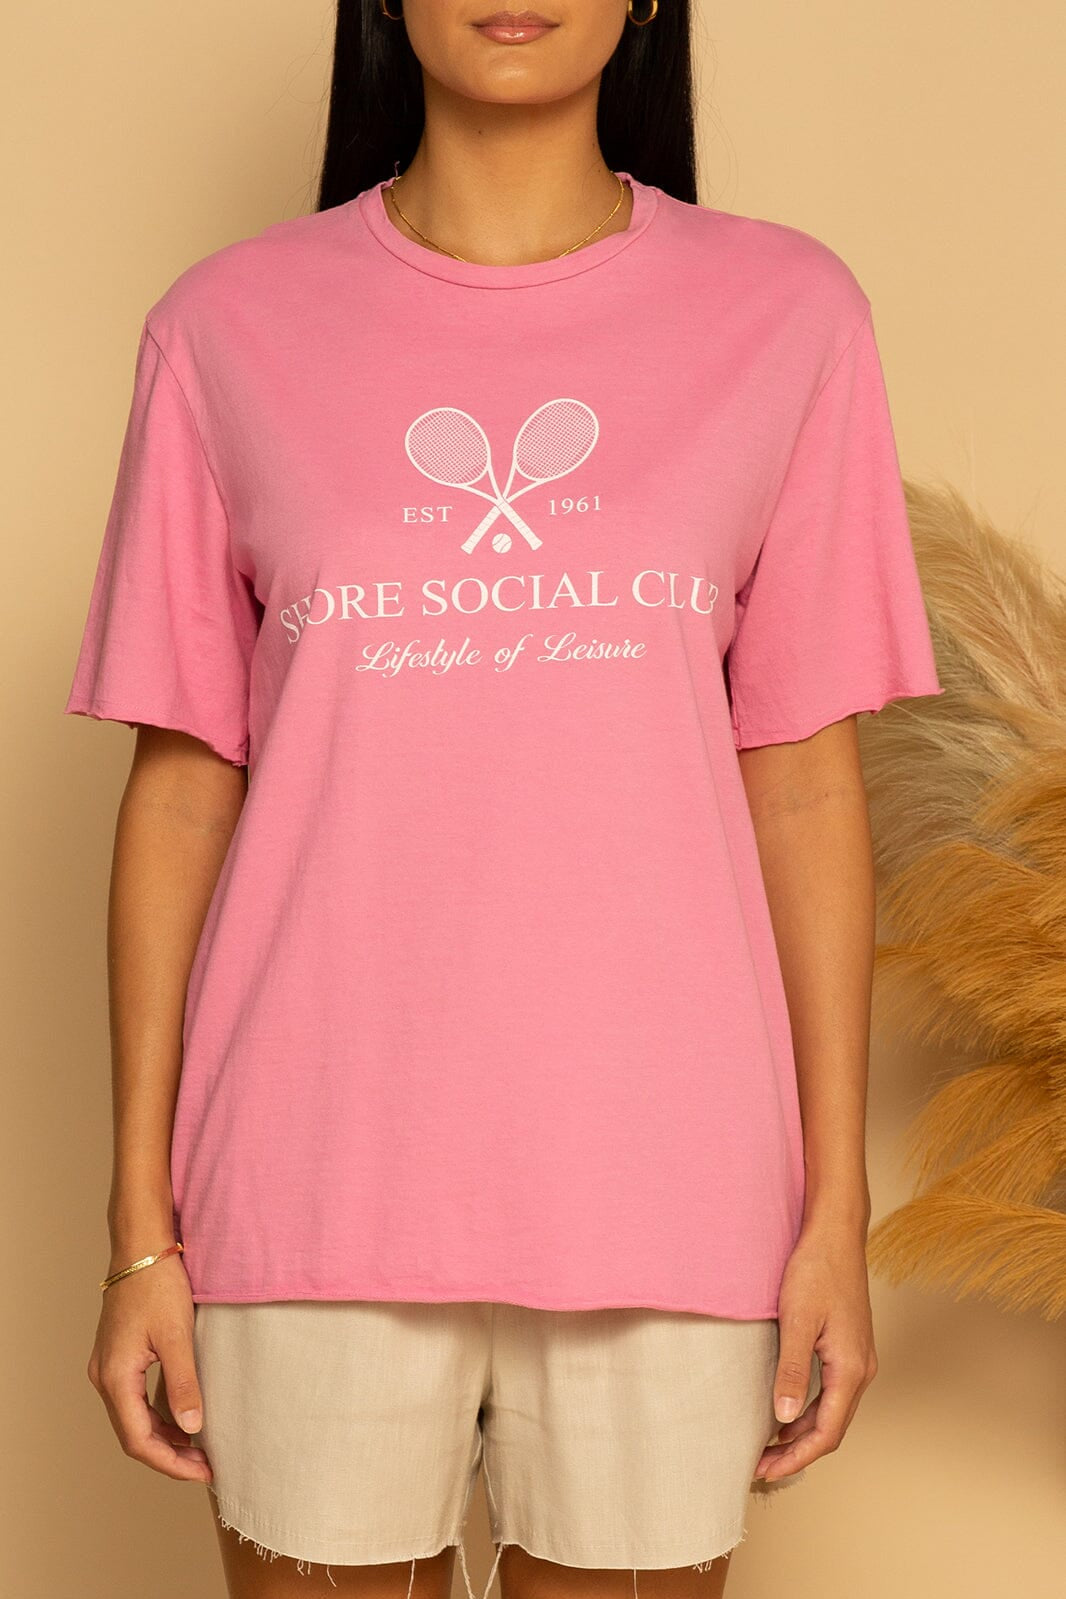 SOCIAL CLUB GRAPHIC TEE - PINK - XS